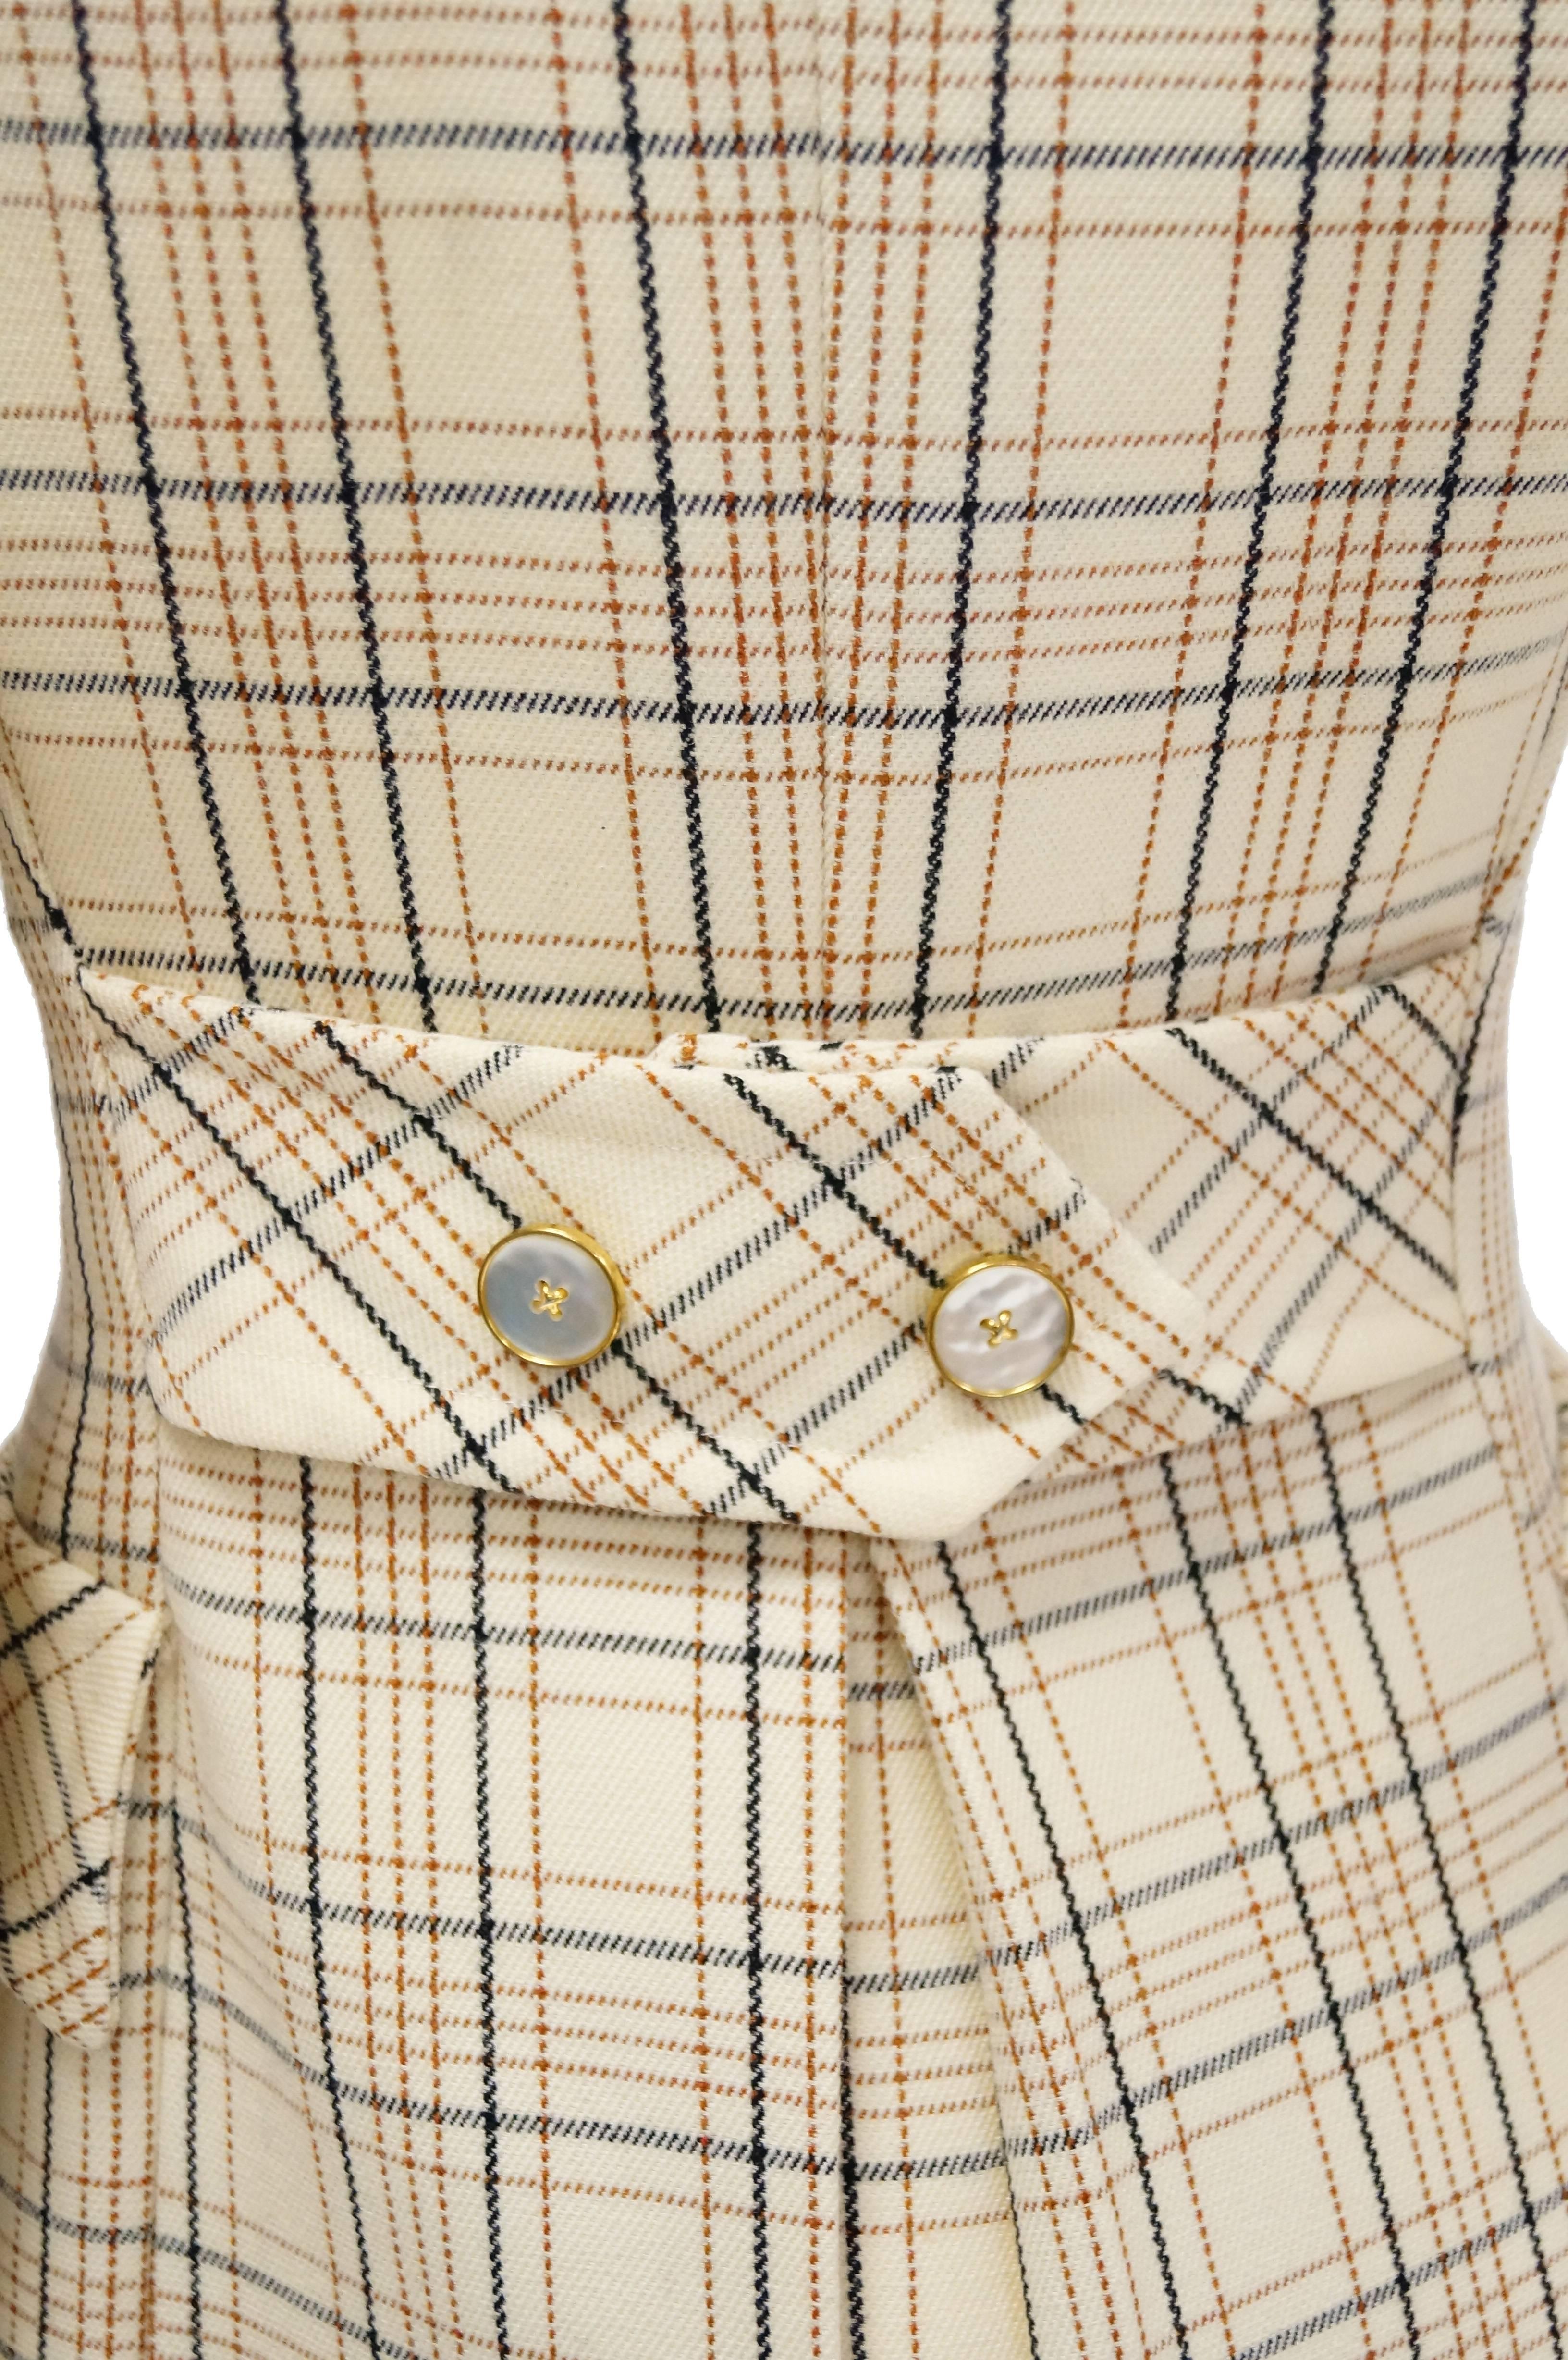  1960s Bill Blass Cream Wool Plaid Coat with Mother of Pearl Buttons 2